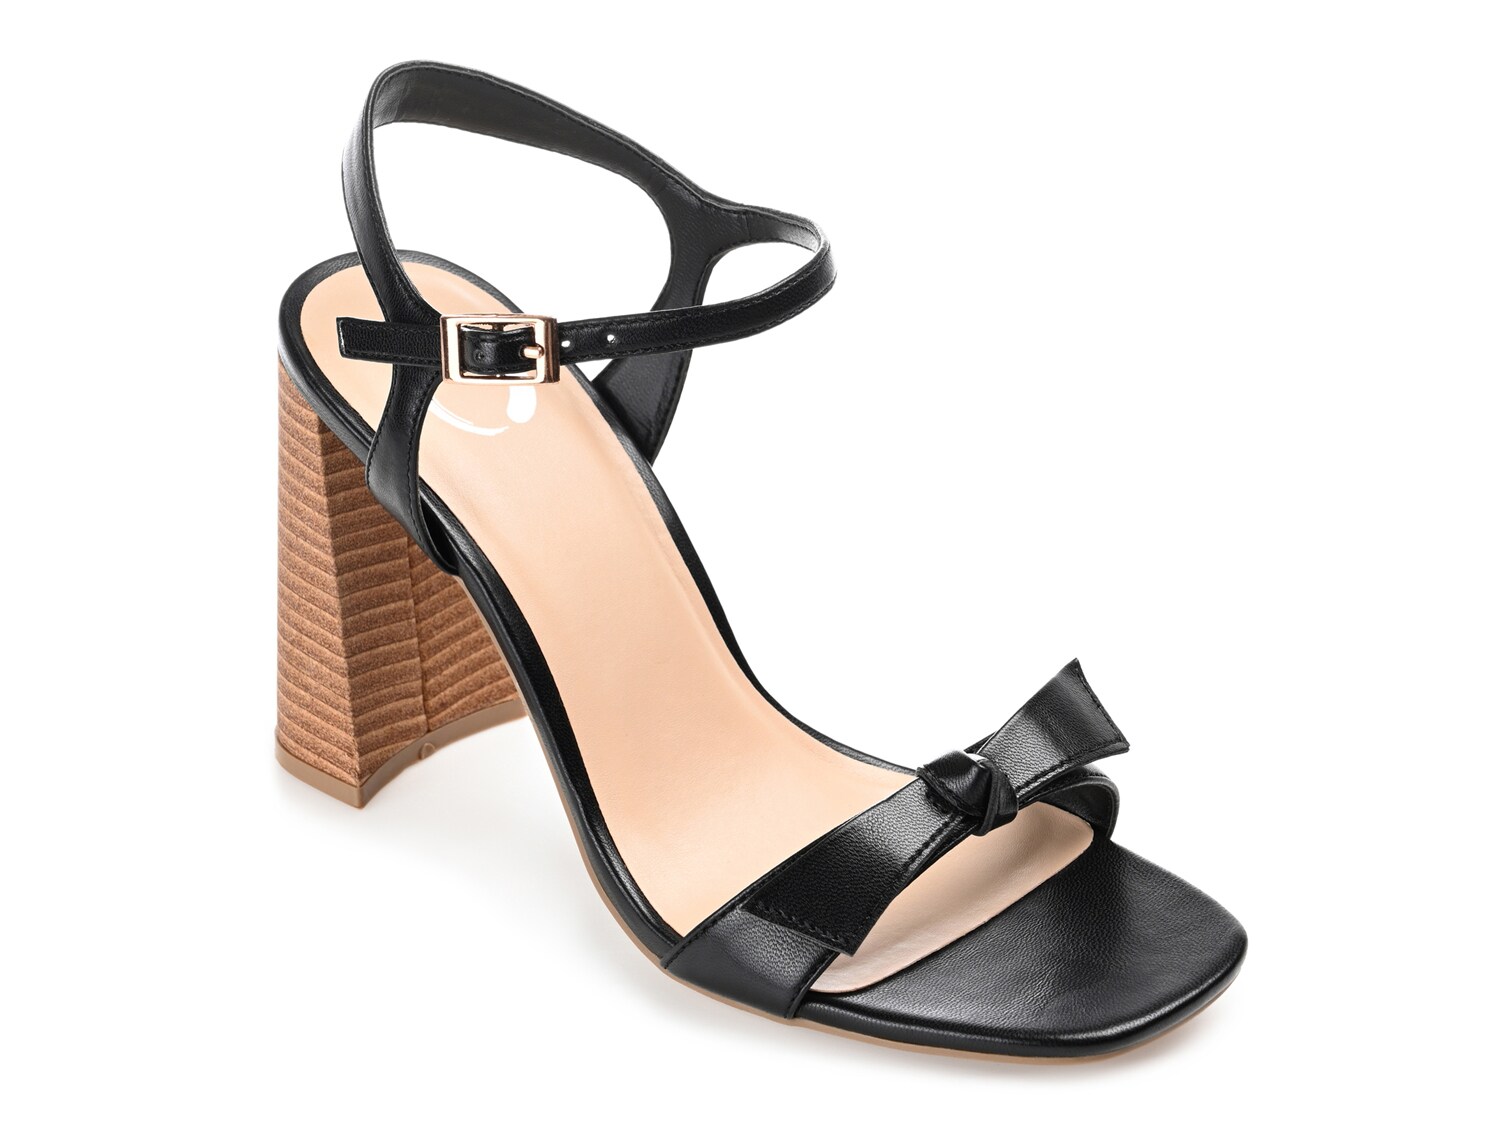 Journee Collection Dianne Sandal - Free Shipping | DSW